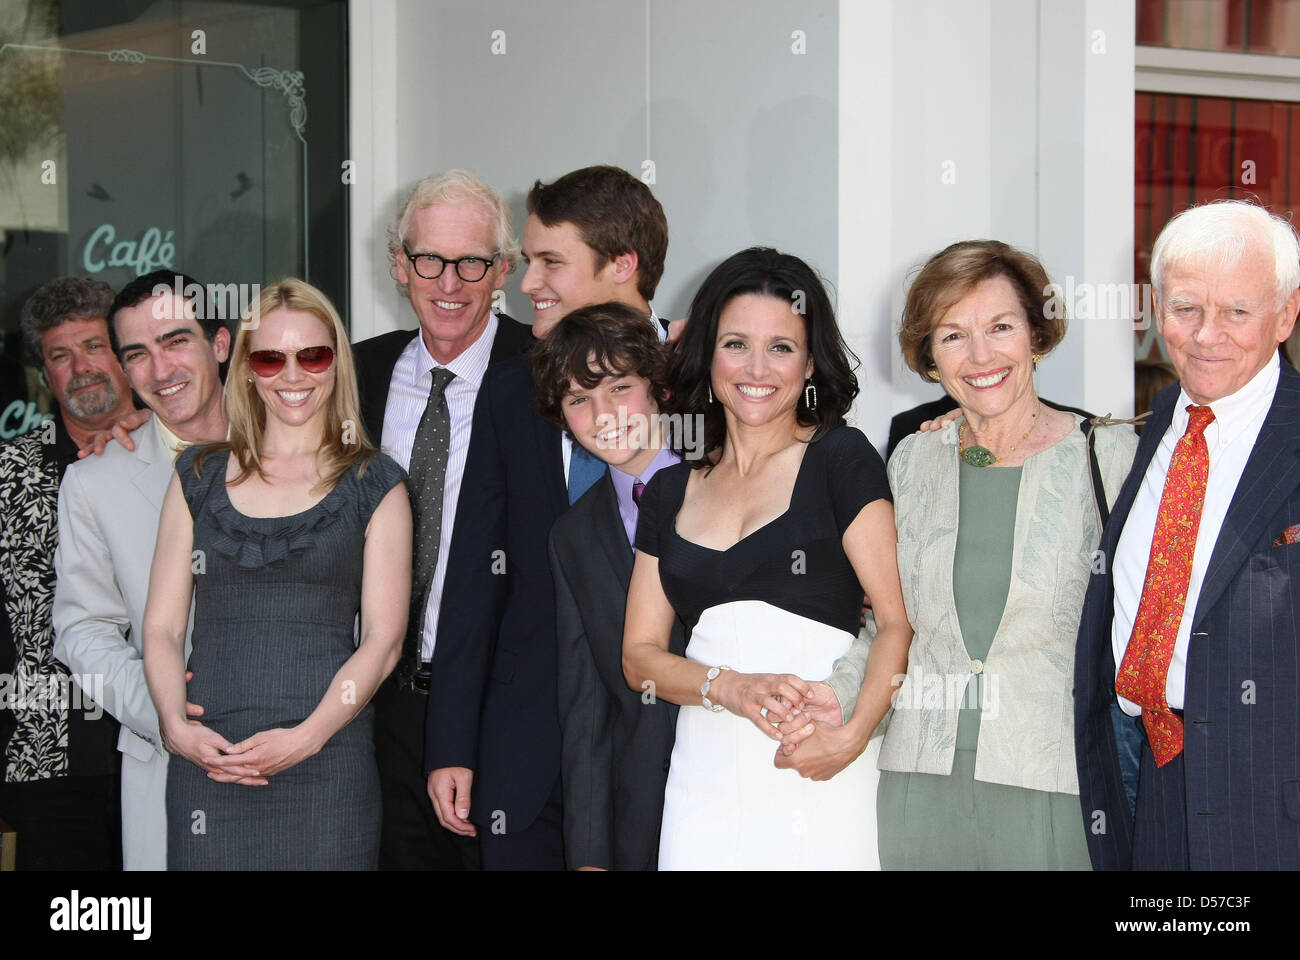 US actress Julia Louis-Dreyfus (3-R) poses with her husband Brad Hall (3-L), her sons Henry (4-L) and Charles (4-R), her parents and sister and brother-in-law as she receives her star on the Hollywood Walk of Fame during a ceremony in Los Angeles, CA, USA, 04 May 2010. Emmy Award winner Julia Louis-Dreyfus, star of 'Seinfeld' and 'The New Adventures of Old Christine' received the 2 Stock Photo